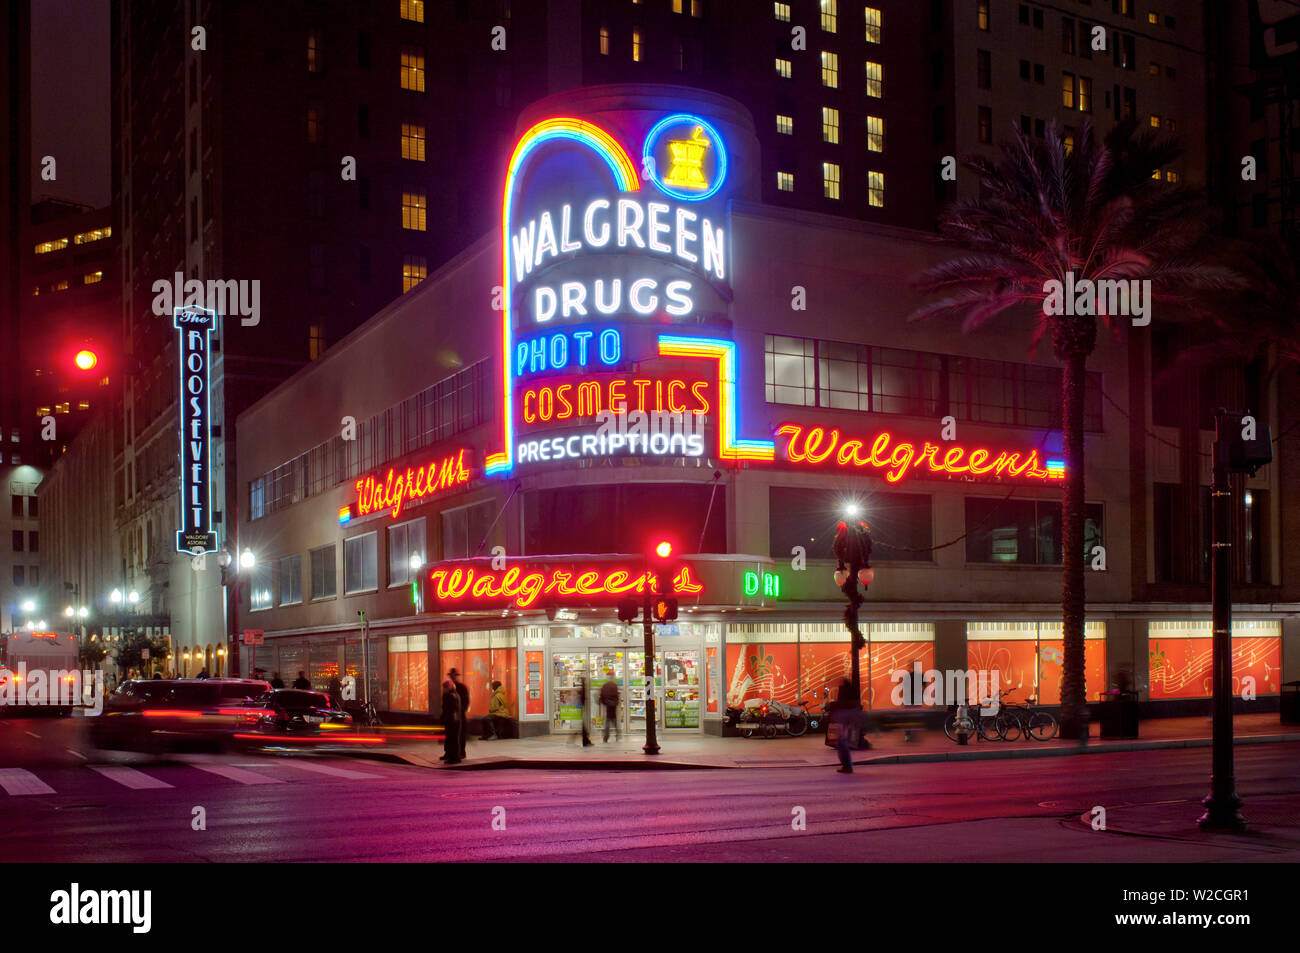 In Louisiana, New Orleans, Canal Street, Walgreens Drug Store, 1938, il Roosevelt Hotel segno Foto Stock